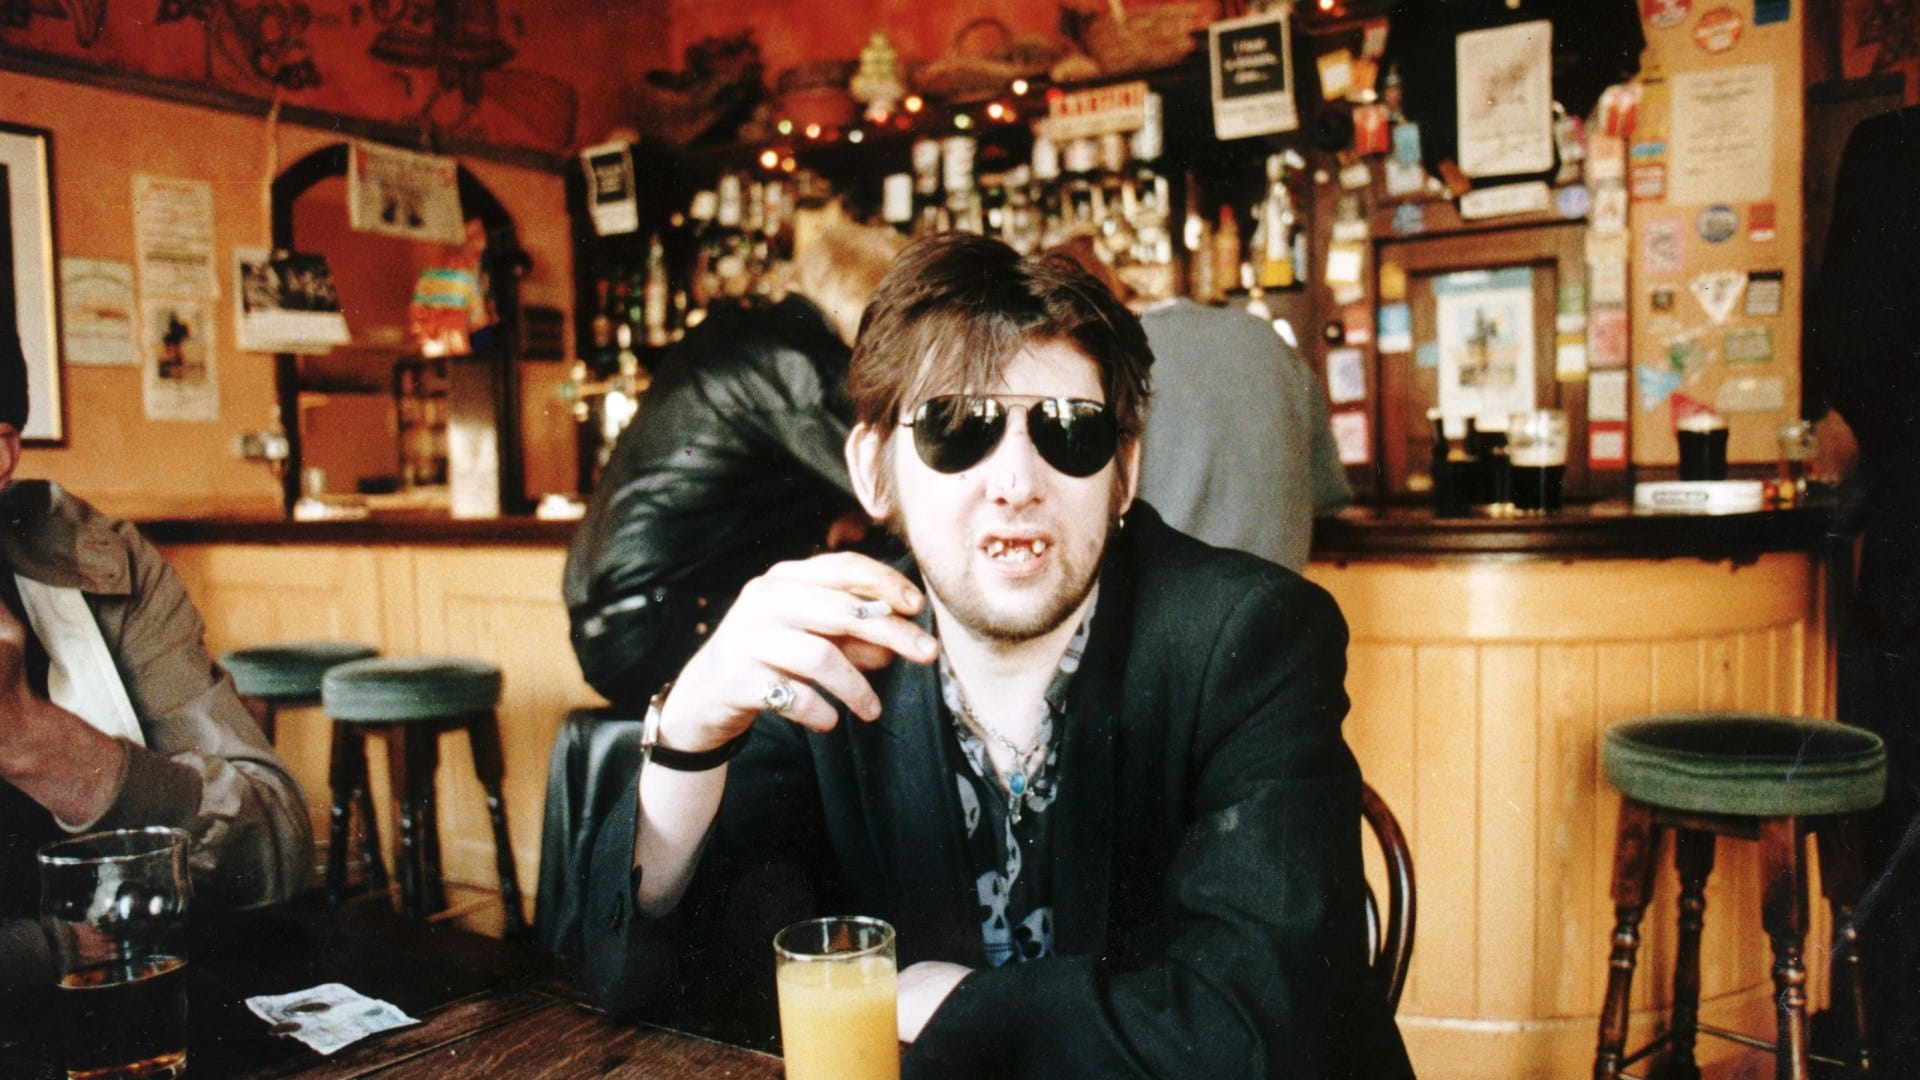 'Fairytale' brought world to tears but there was much more to wild poet Shane MacGowan than his Christmas masterpiece